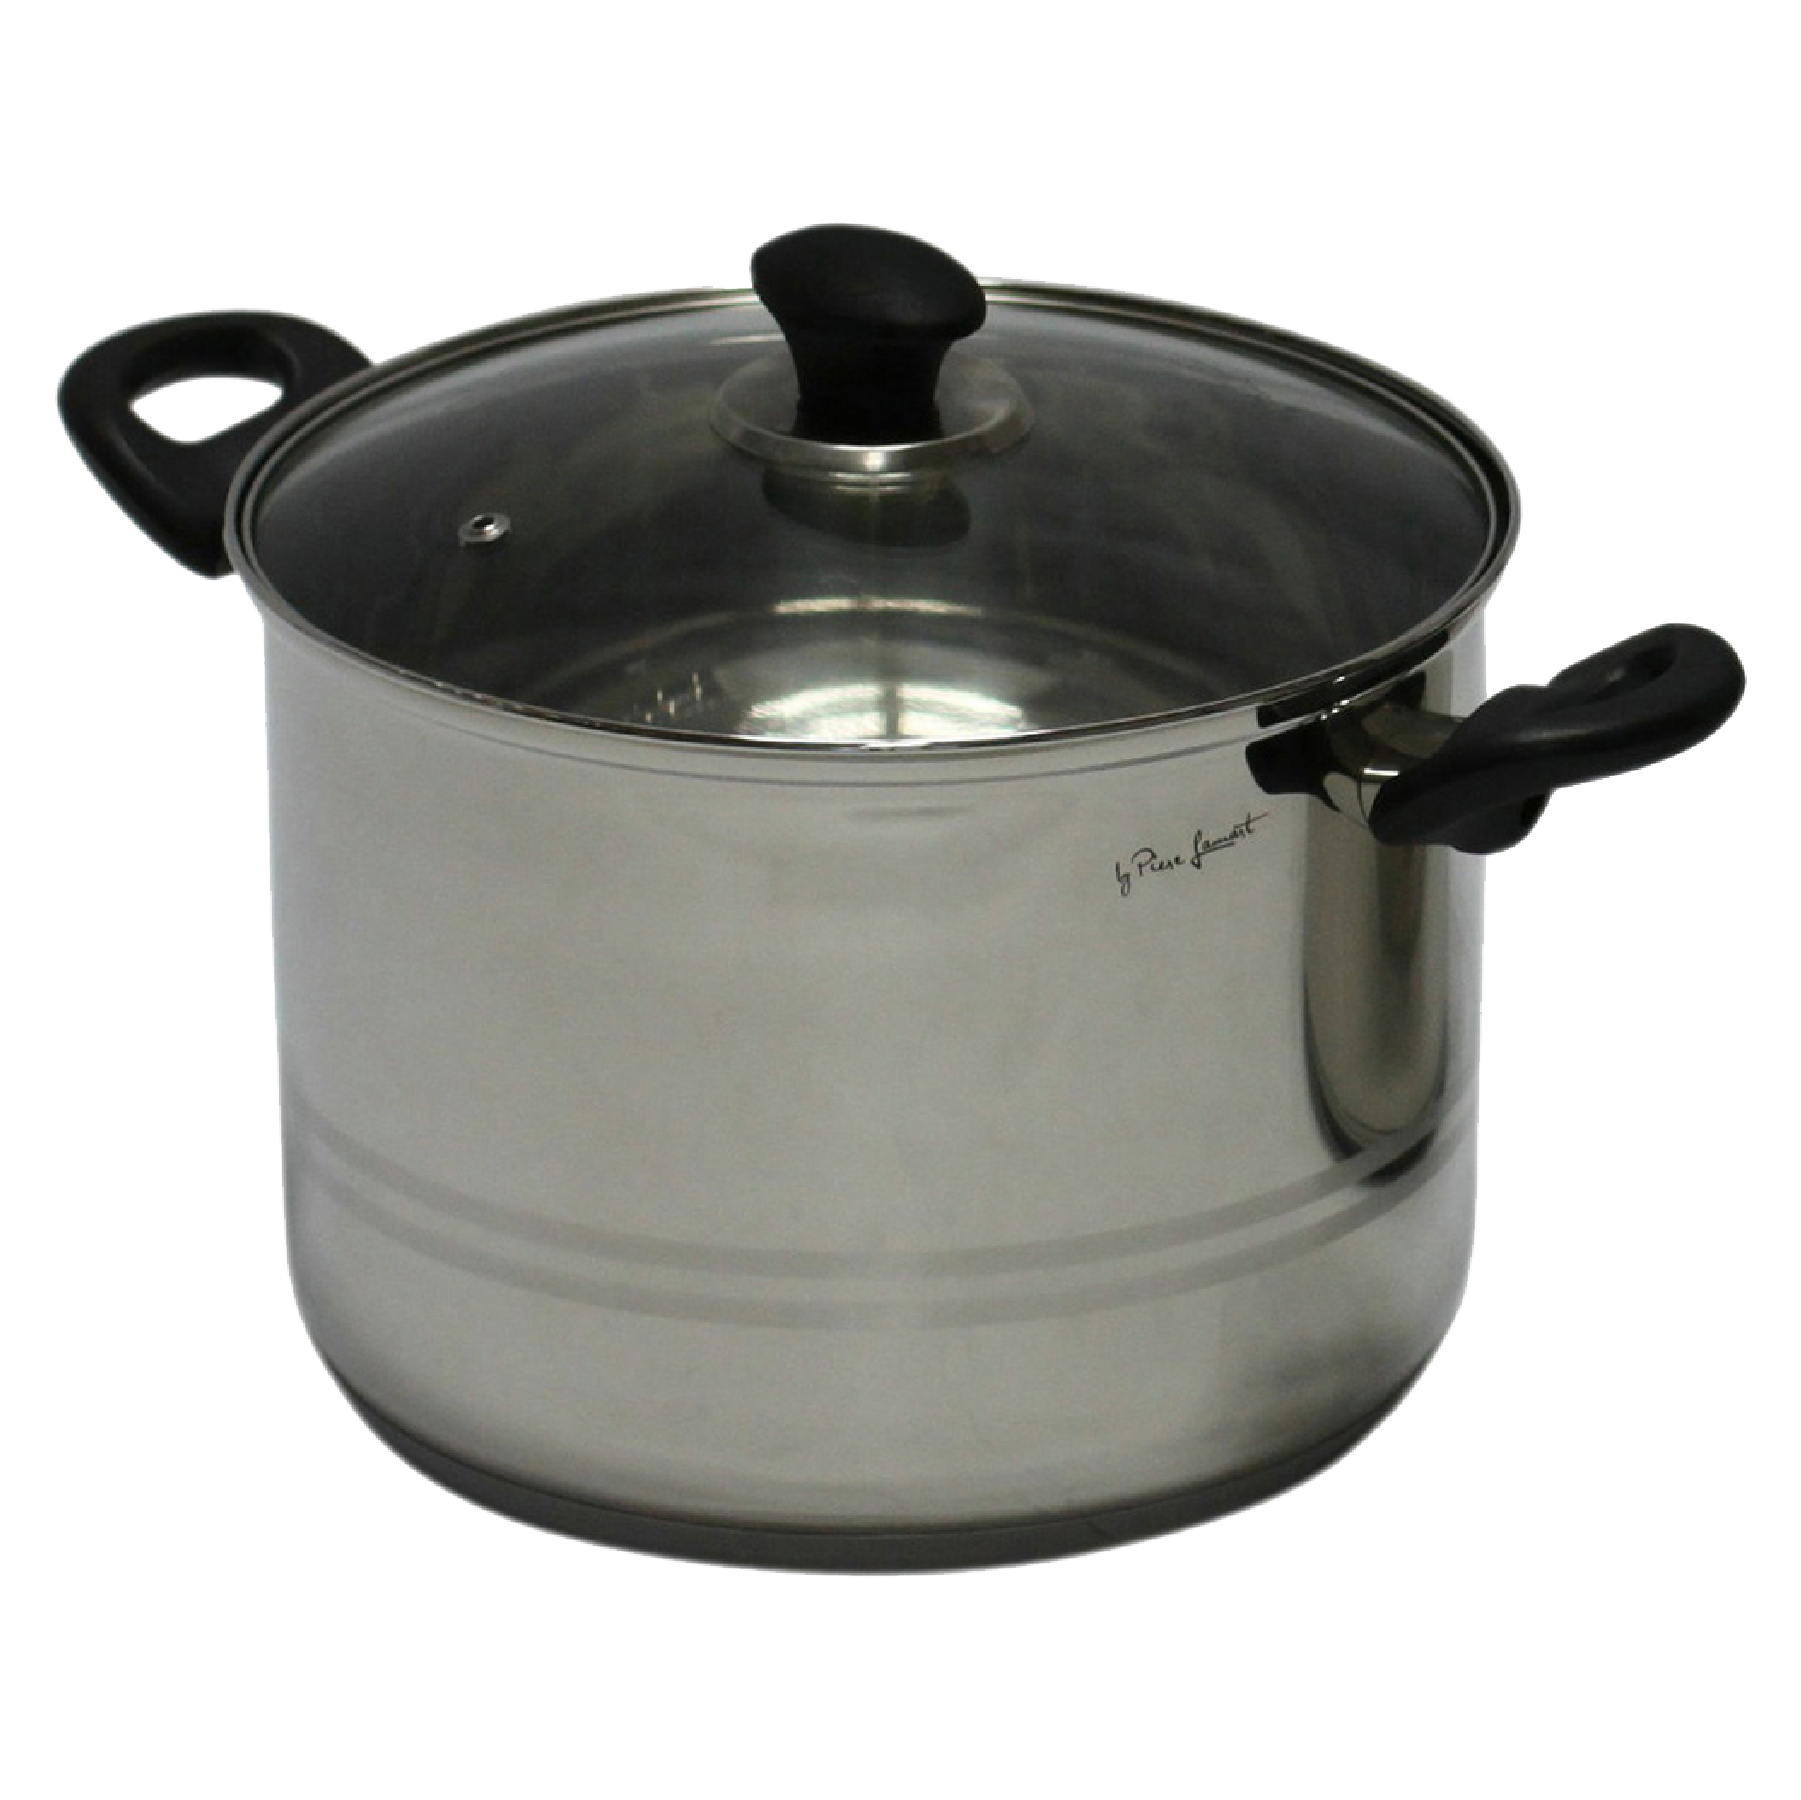 Lamart Leger Stainless Steel Pot  With Lids Lid With A Hole For Steam Graduated Measurement 24cm Diameter, , H=18cm, 7.9L, LTB2418